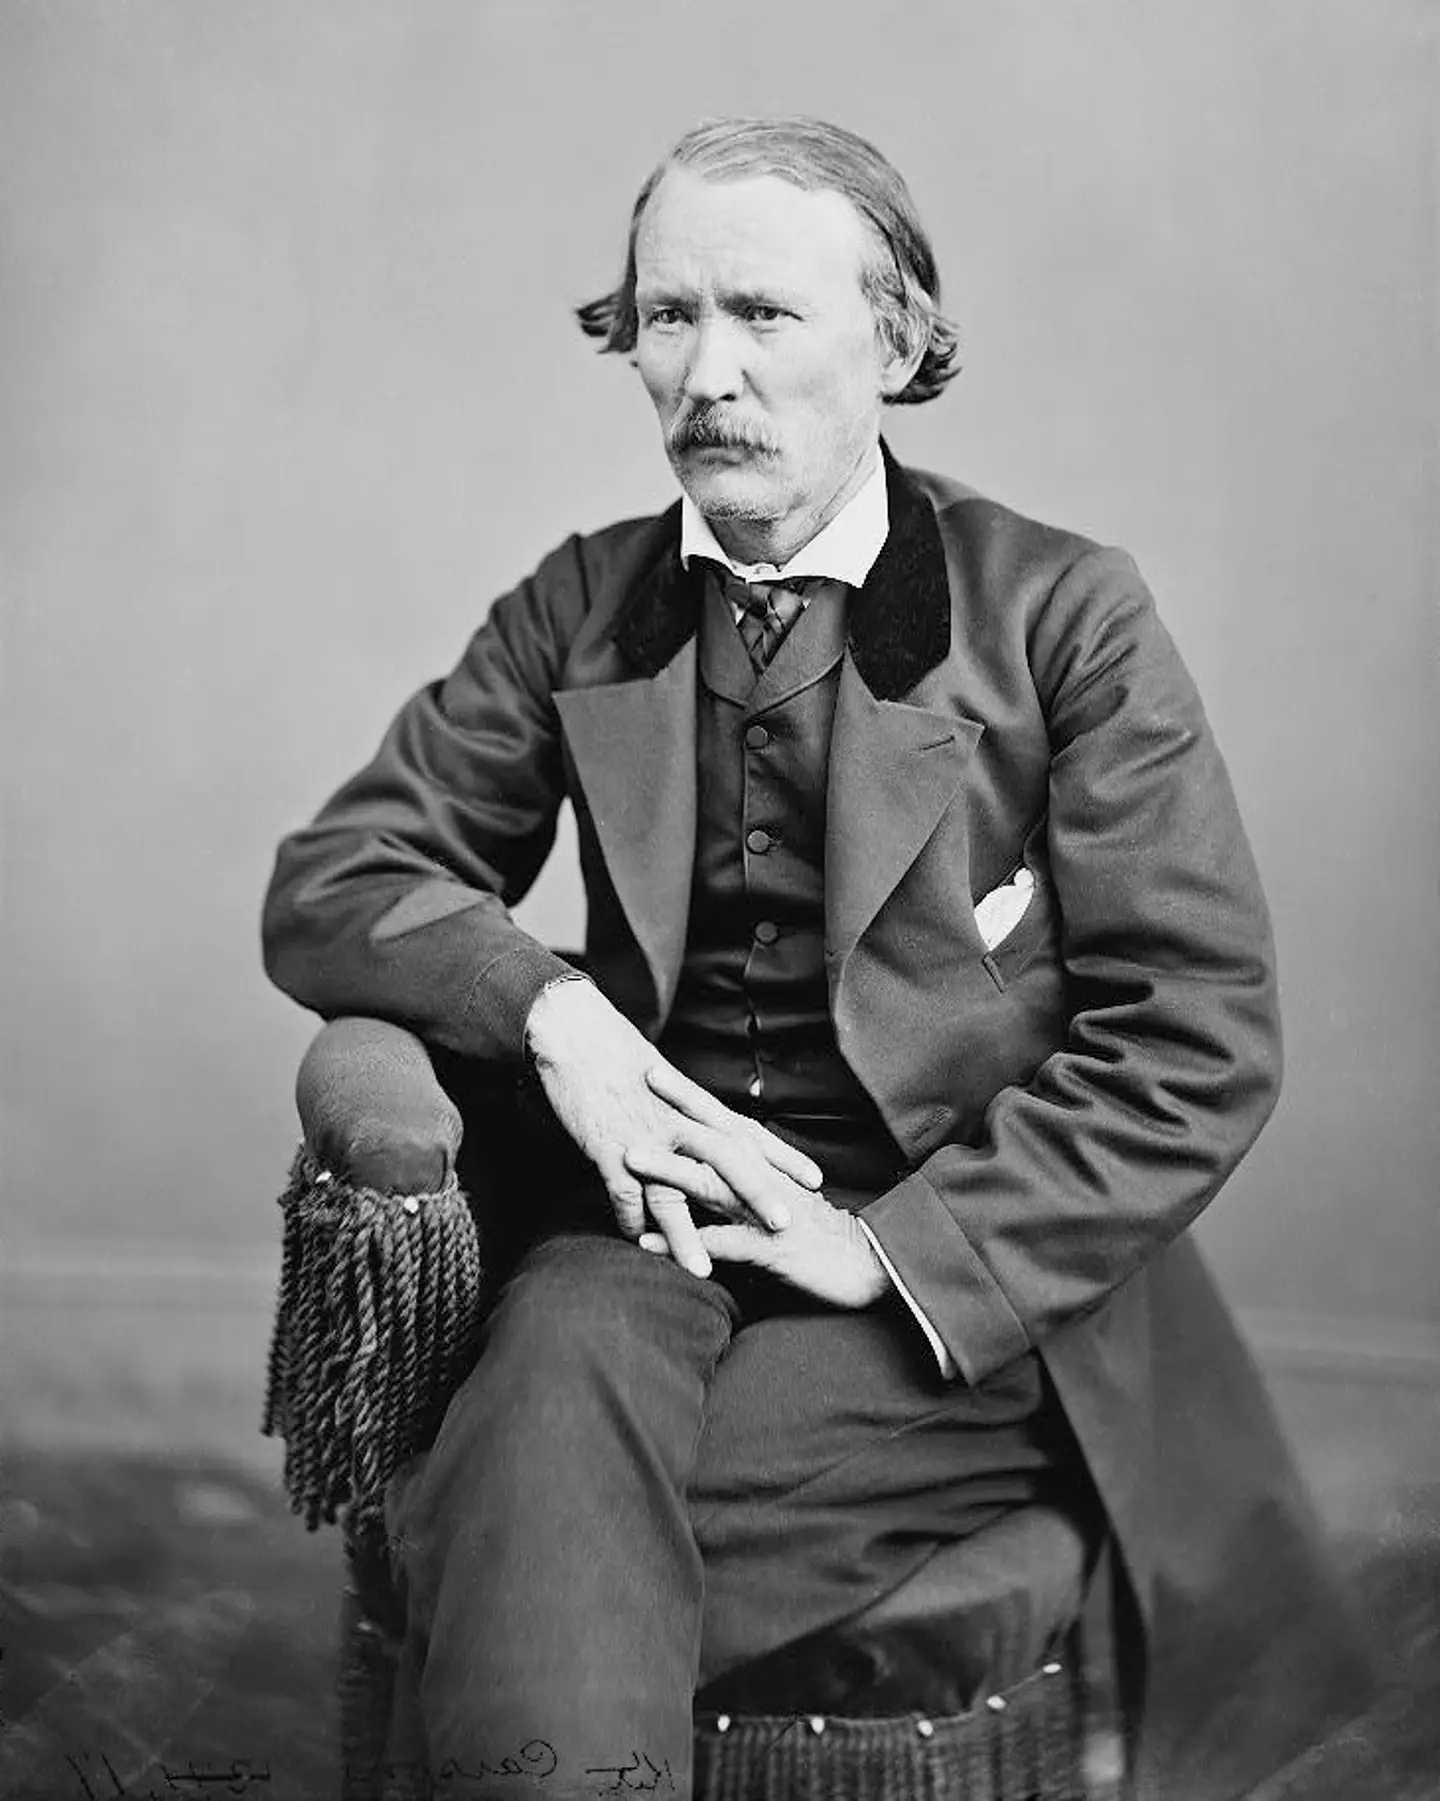 Kit Carson was an American frontiersman who carried out brutal campaigns against Native Americans.